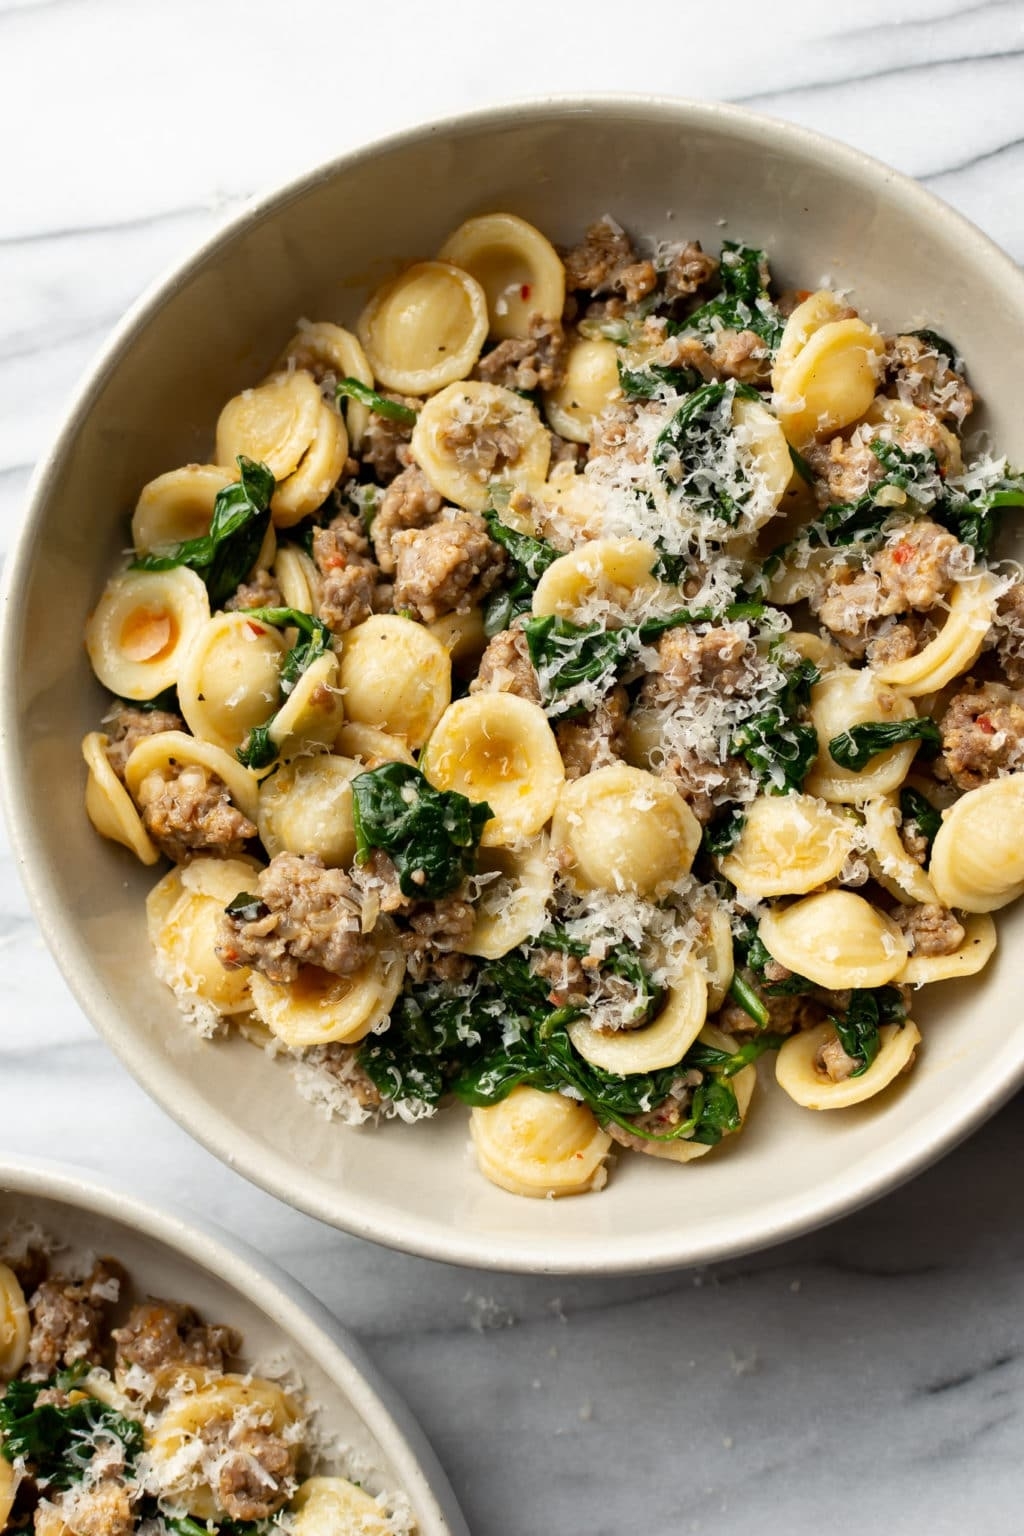 Bowl of orecchiette pasta with sausage, greens, and grated cheese